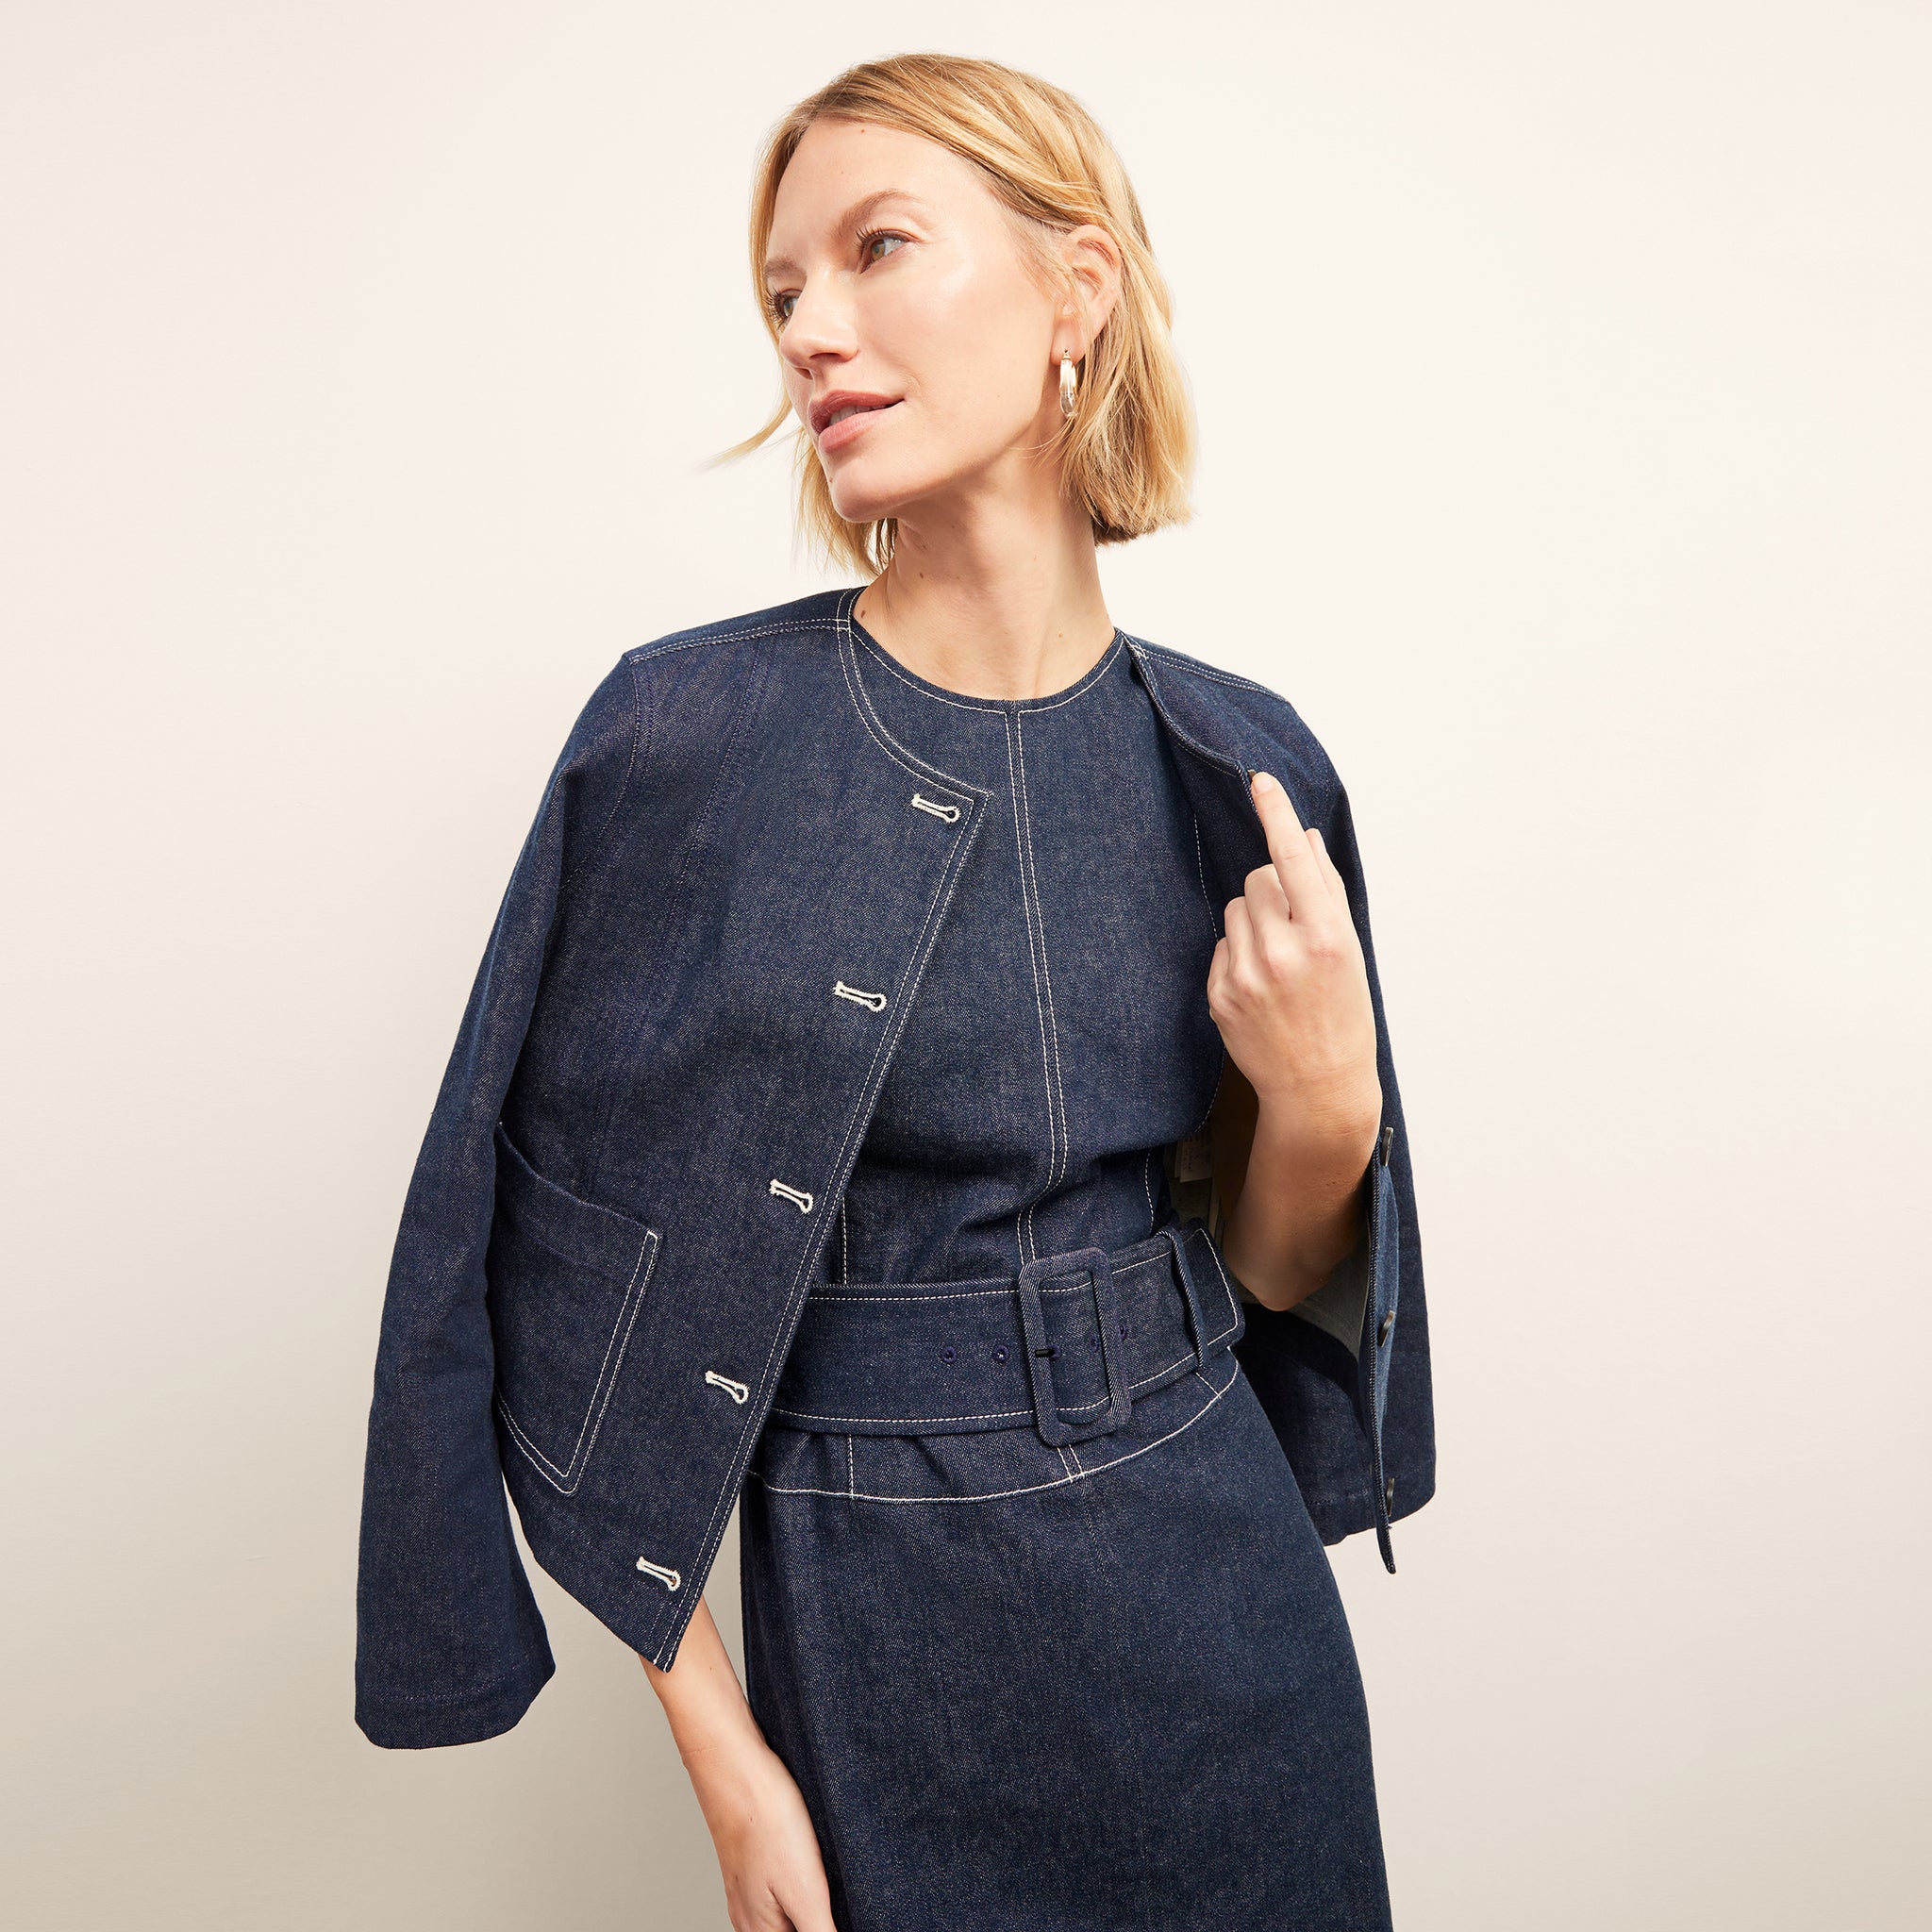 front image of a woman wearing the kane jacket in dark wash